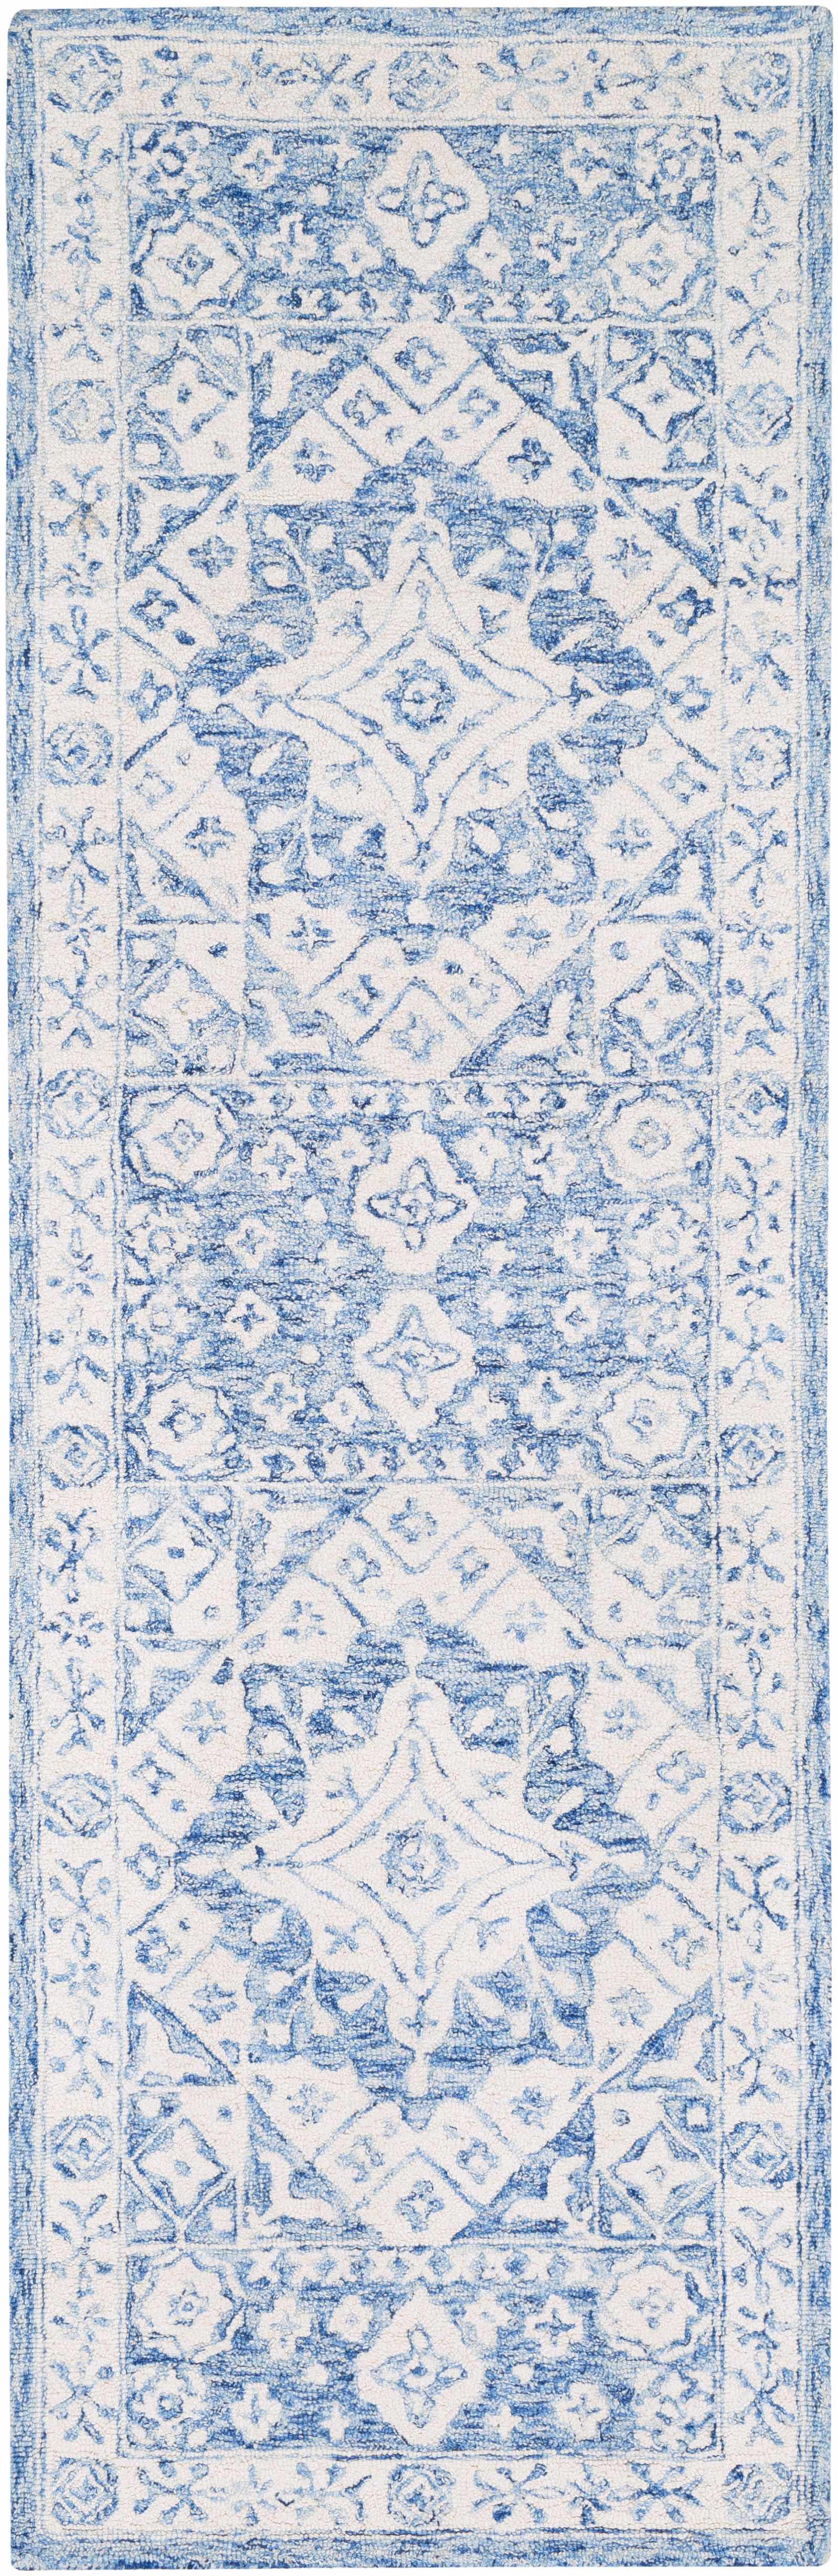 Boutique Rugs Rugs Devine Wool Area Rug